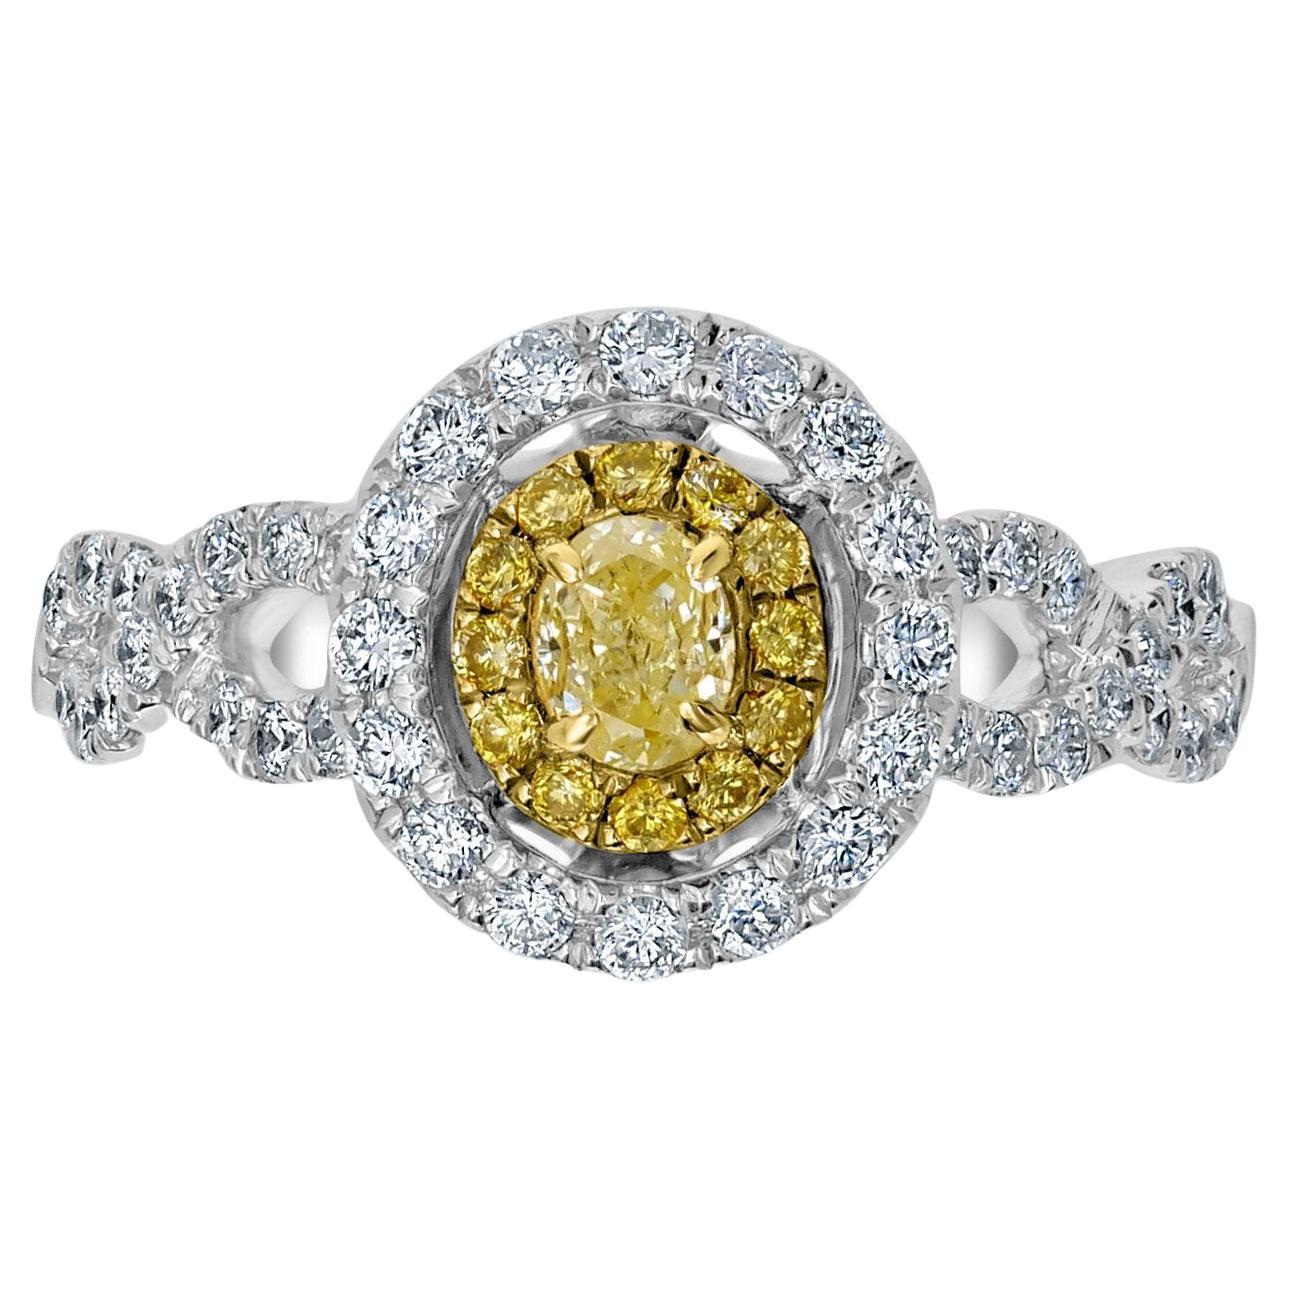 0.23ct Yellow Diamond Ring with 0.58tct Diamond Set in 18KW & 22KY Two Tone Gold